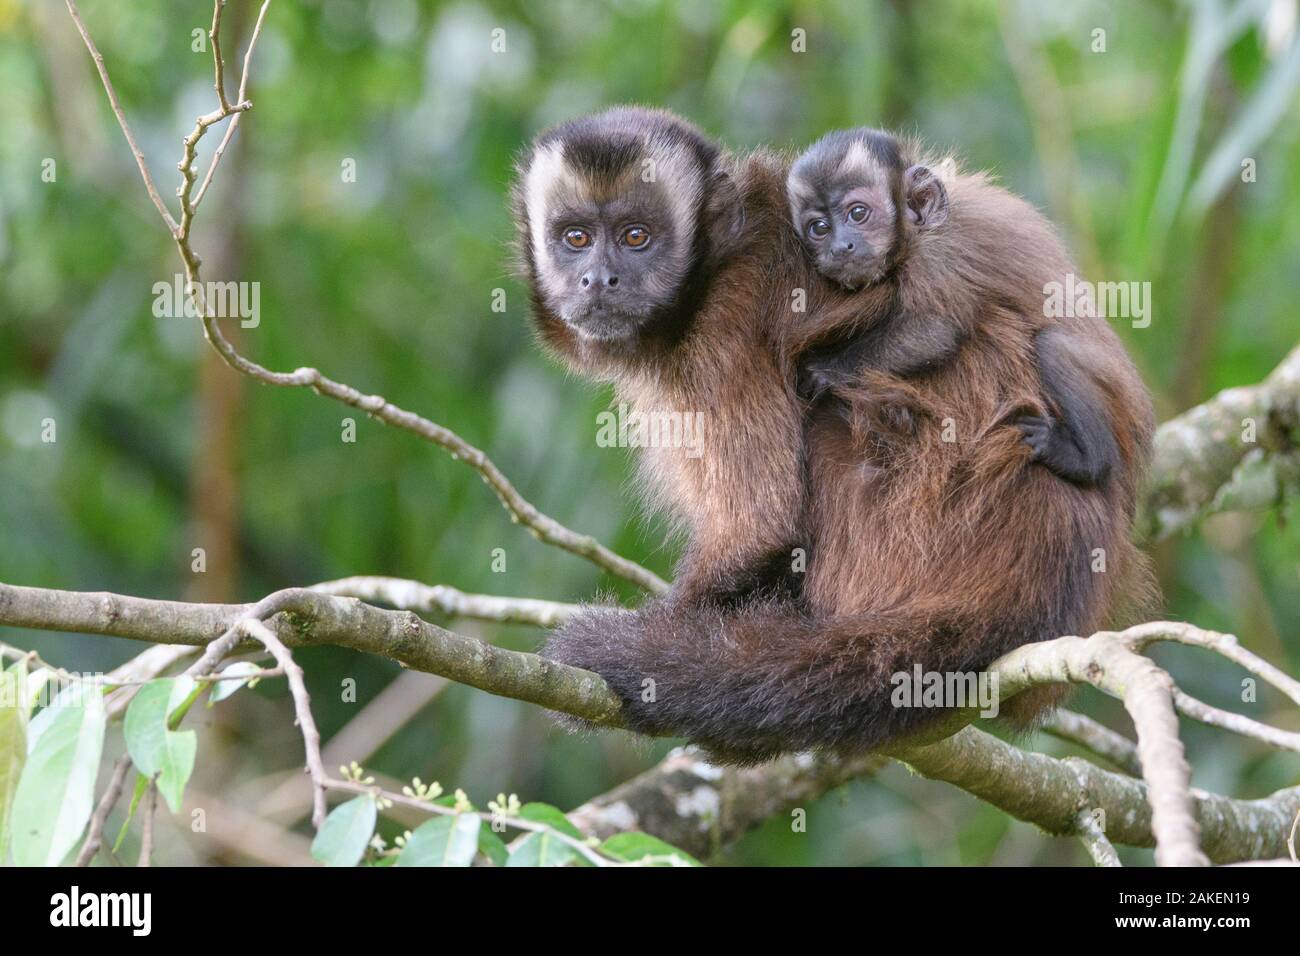 Tufted / Brown capuchin (Cebus apella), female with baby on back, sitting in tree, mid-altitude montane forest, Manu Biosphere Reserve, Peru. Stock Photo